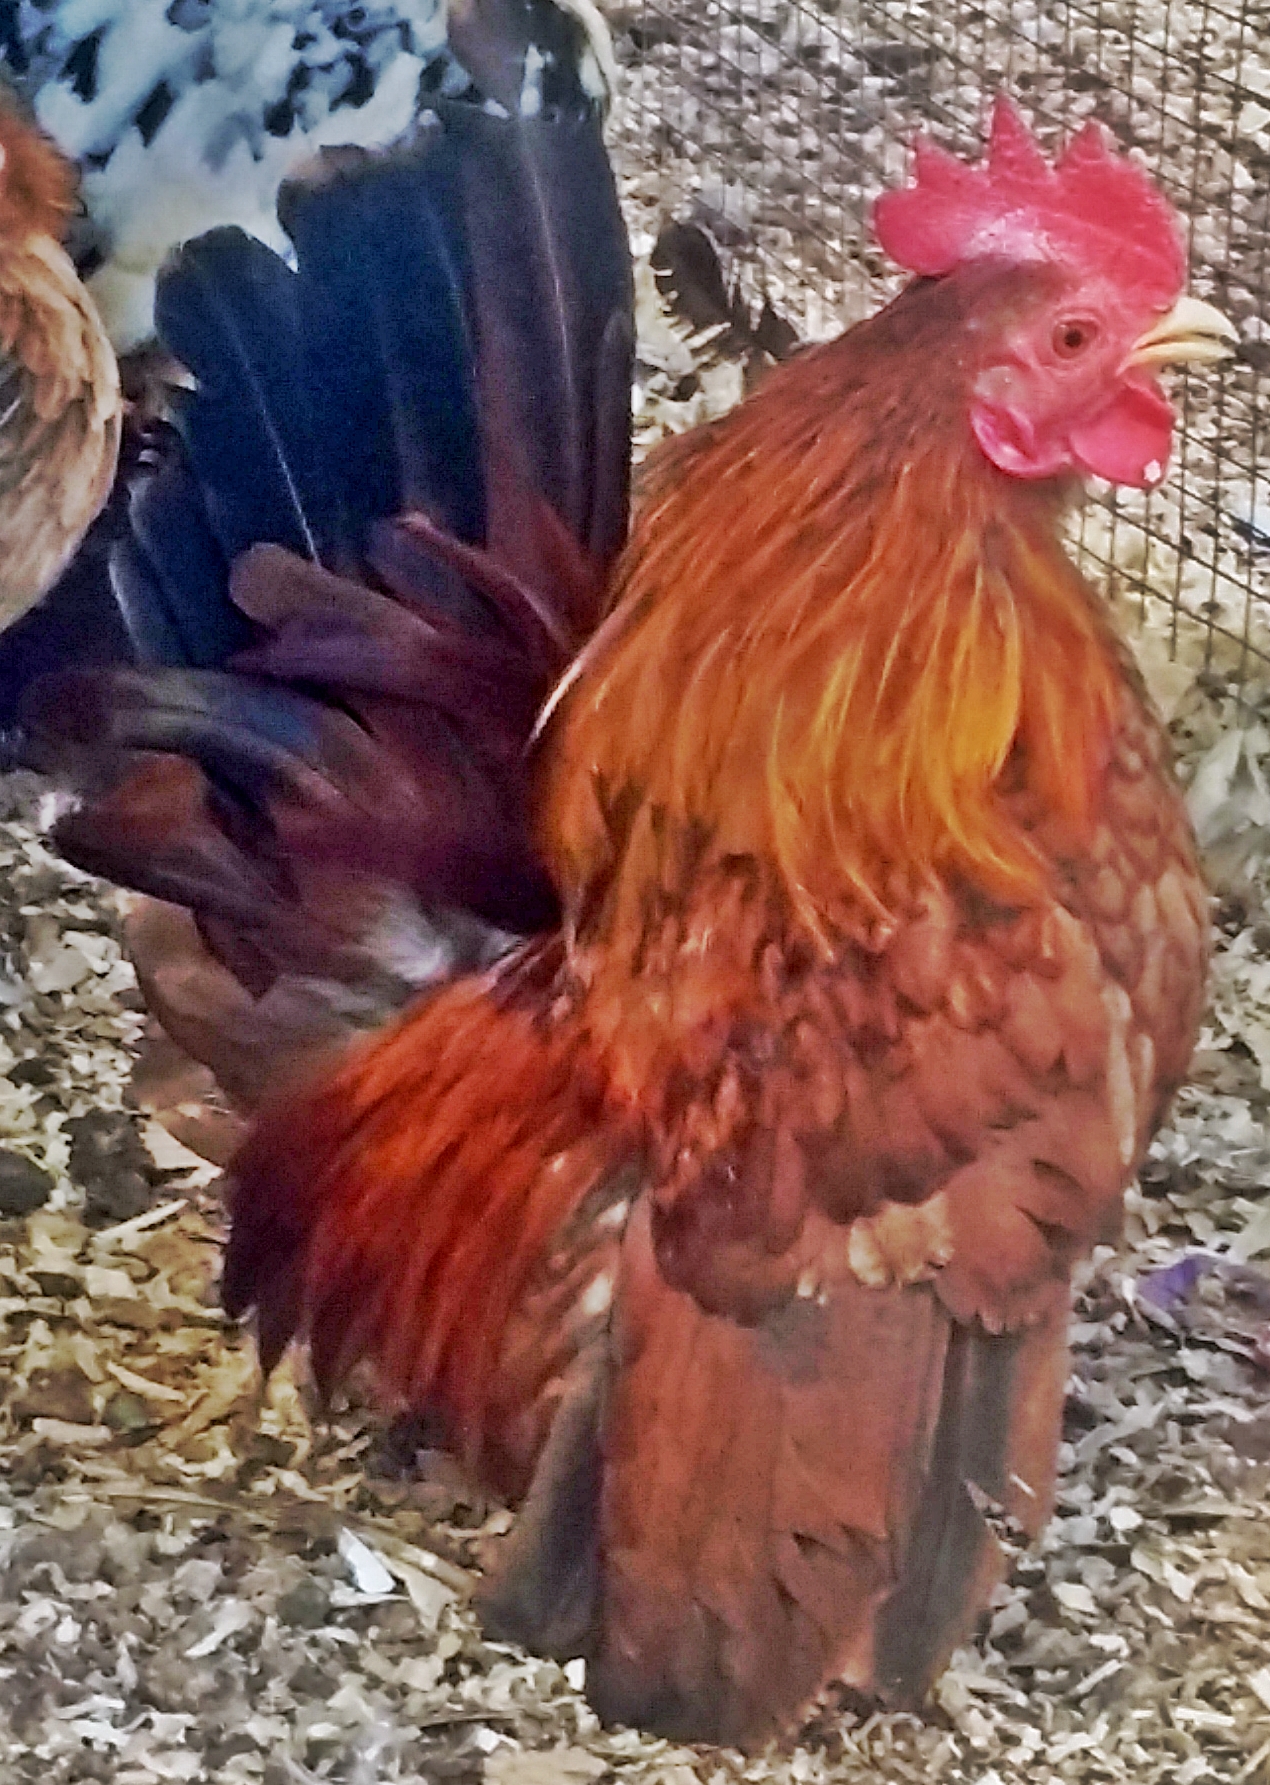 The OC Serama line, is a beautiful well cared for, both type and personality line. We have chosen this line to cross into this season. Here is "Toad" the second roo over the primary coop for the 2015 season. The first roo has already been removed and sired over 20 chicks with the girls "Toad" is now over.